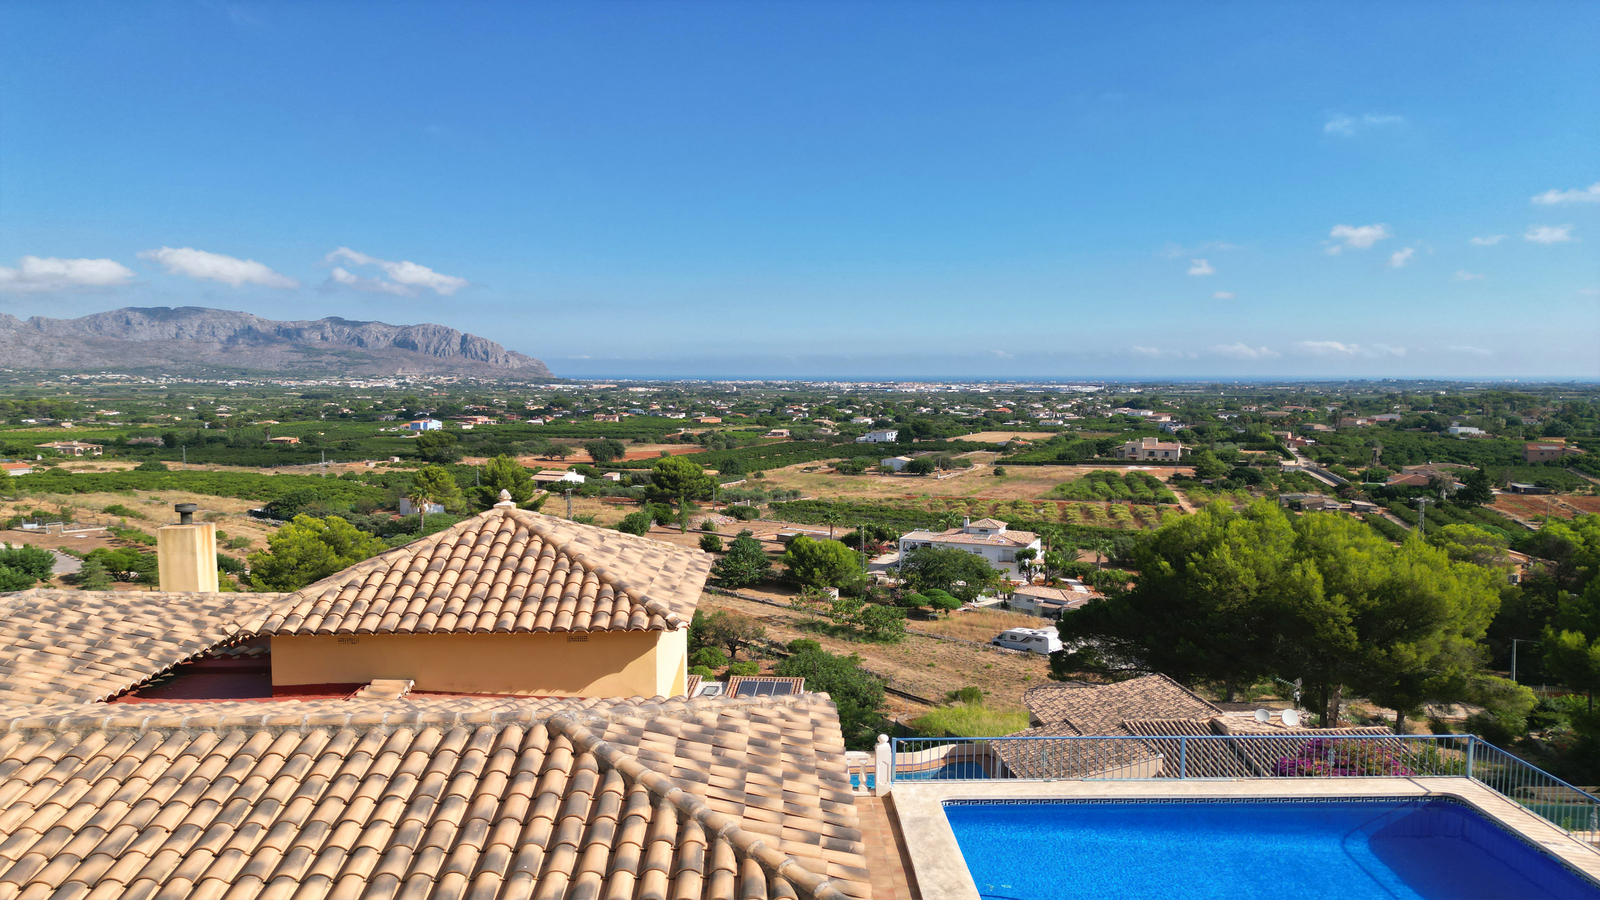 Beautiful 3 bedroom villa with pool with panoramic views, BBQ area, parking space.